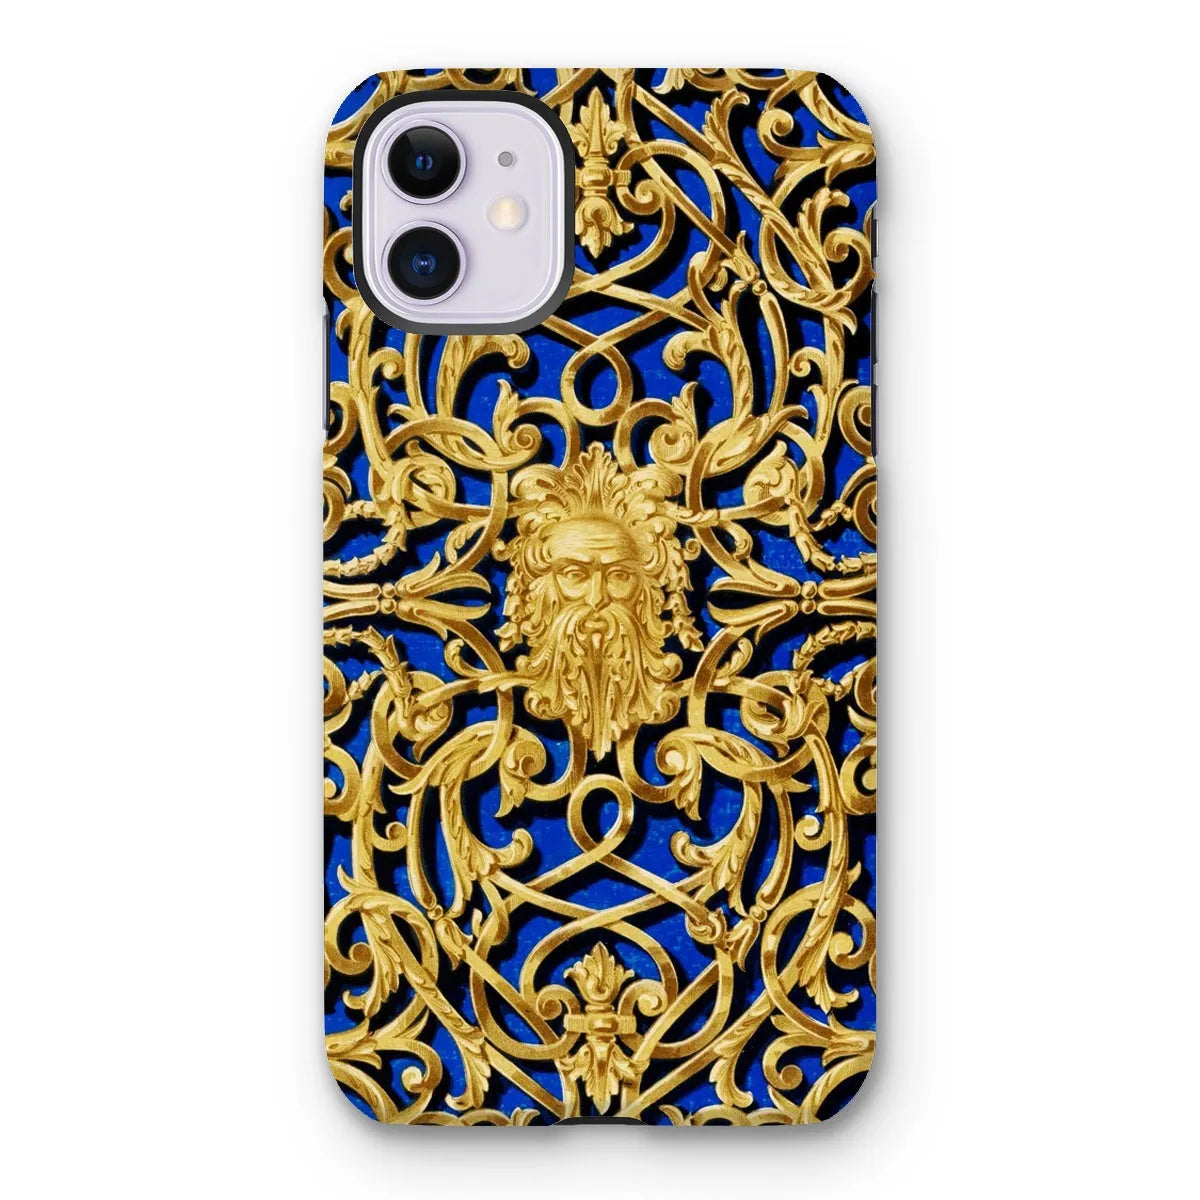 Gilded Gate Victorian Phone Case - Sir Matthew Digby Wyatt - Iphone 11 / Matte - Mobile Phone Cases - Aesthetic Art